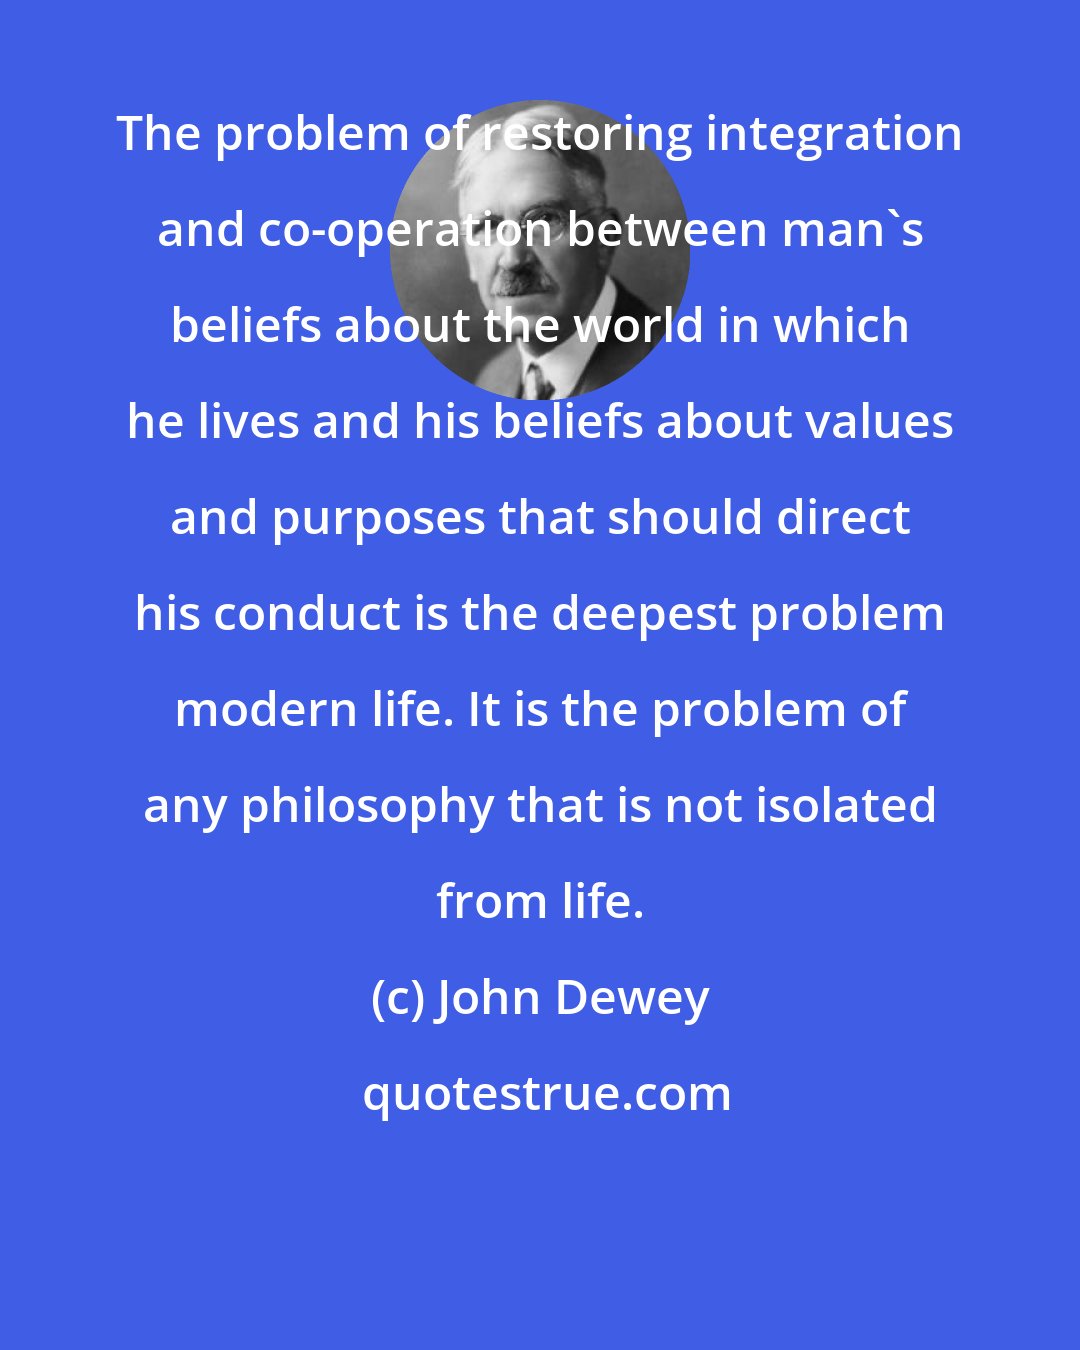 John Dewey: The problem of restoring integration and co-operation between man's beliefs about the world in which he lives and his beliefs about values and purposes that should direct his conduct is the deepest problem modern life. It is the problem of any philosophy that is not isolated from life.